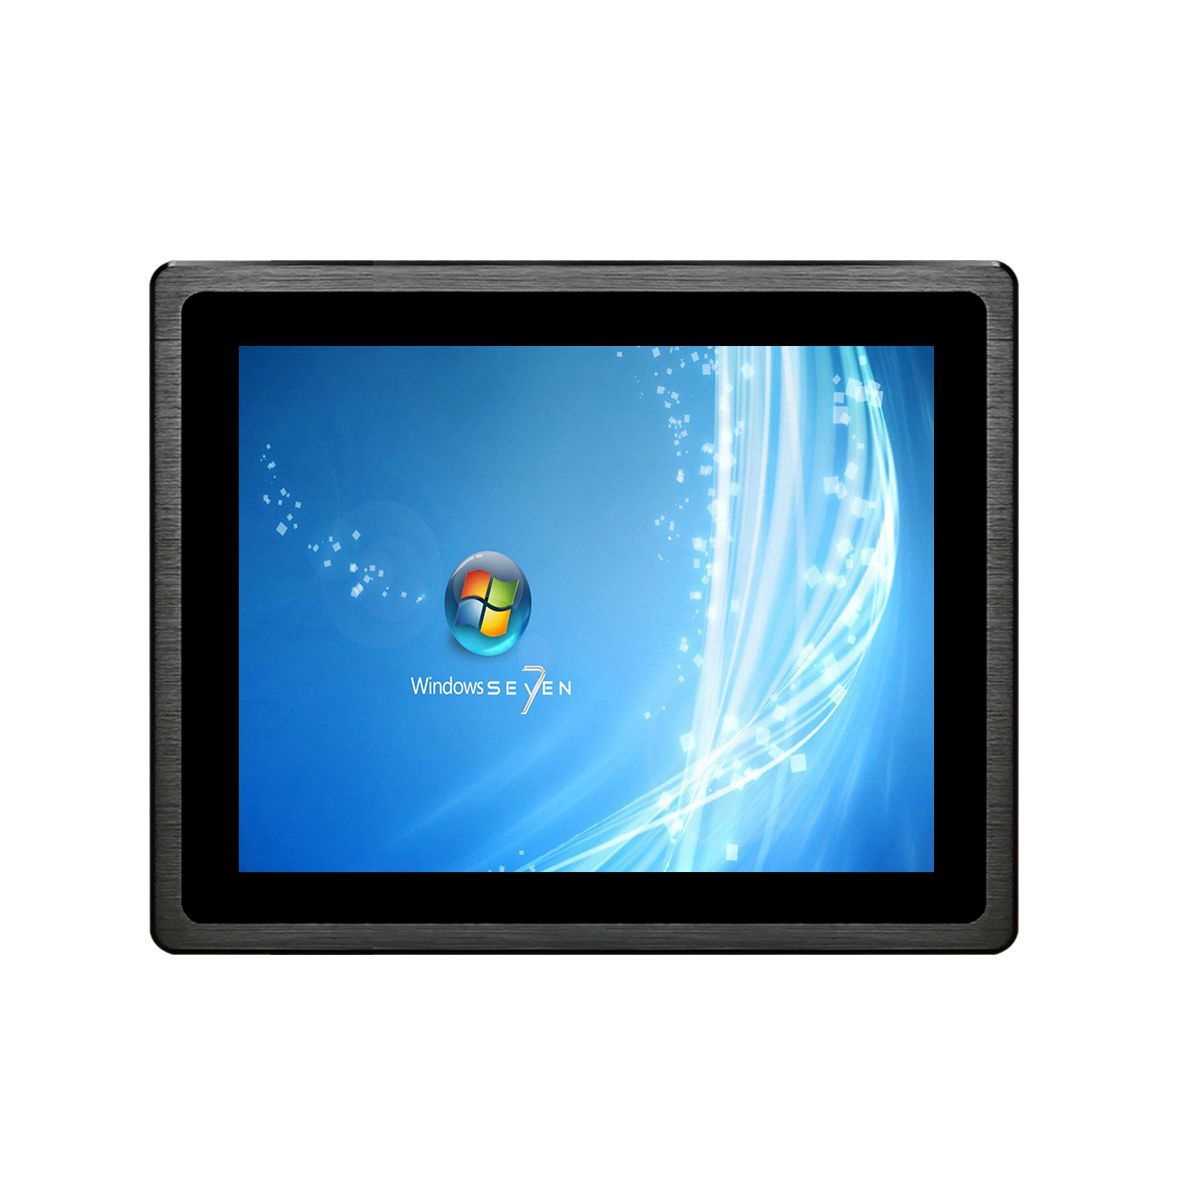 Competitive Price for Outdoor Waterprooftv - Resistive Closed Frame Touch Monitor – PID